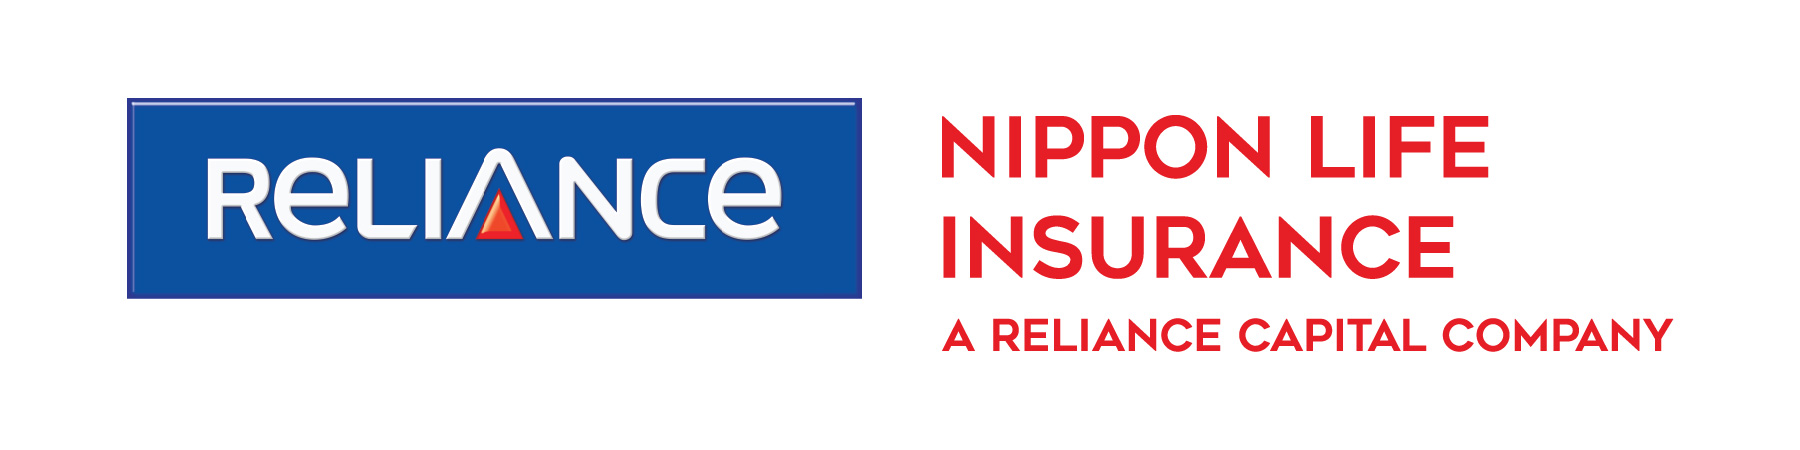 RELIANCE NIPPON LIFE INSURANCE LAUNCHES ‘DIGI DAFTAR’ – A UNIQUE APP TO EMPOWER FINANCIAL ADVISORS